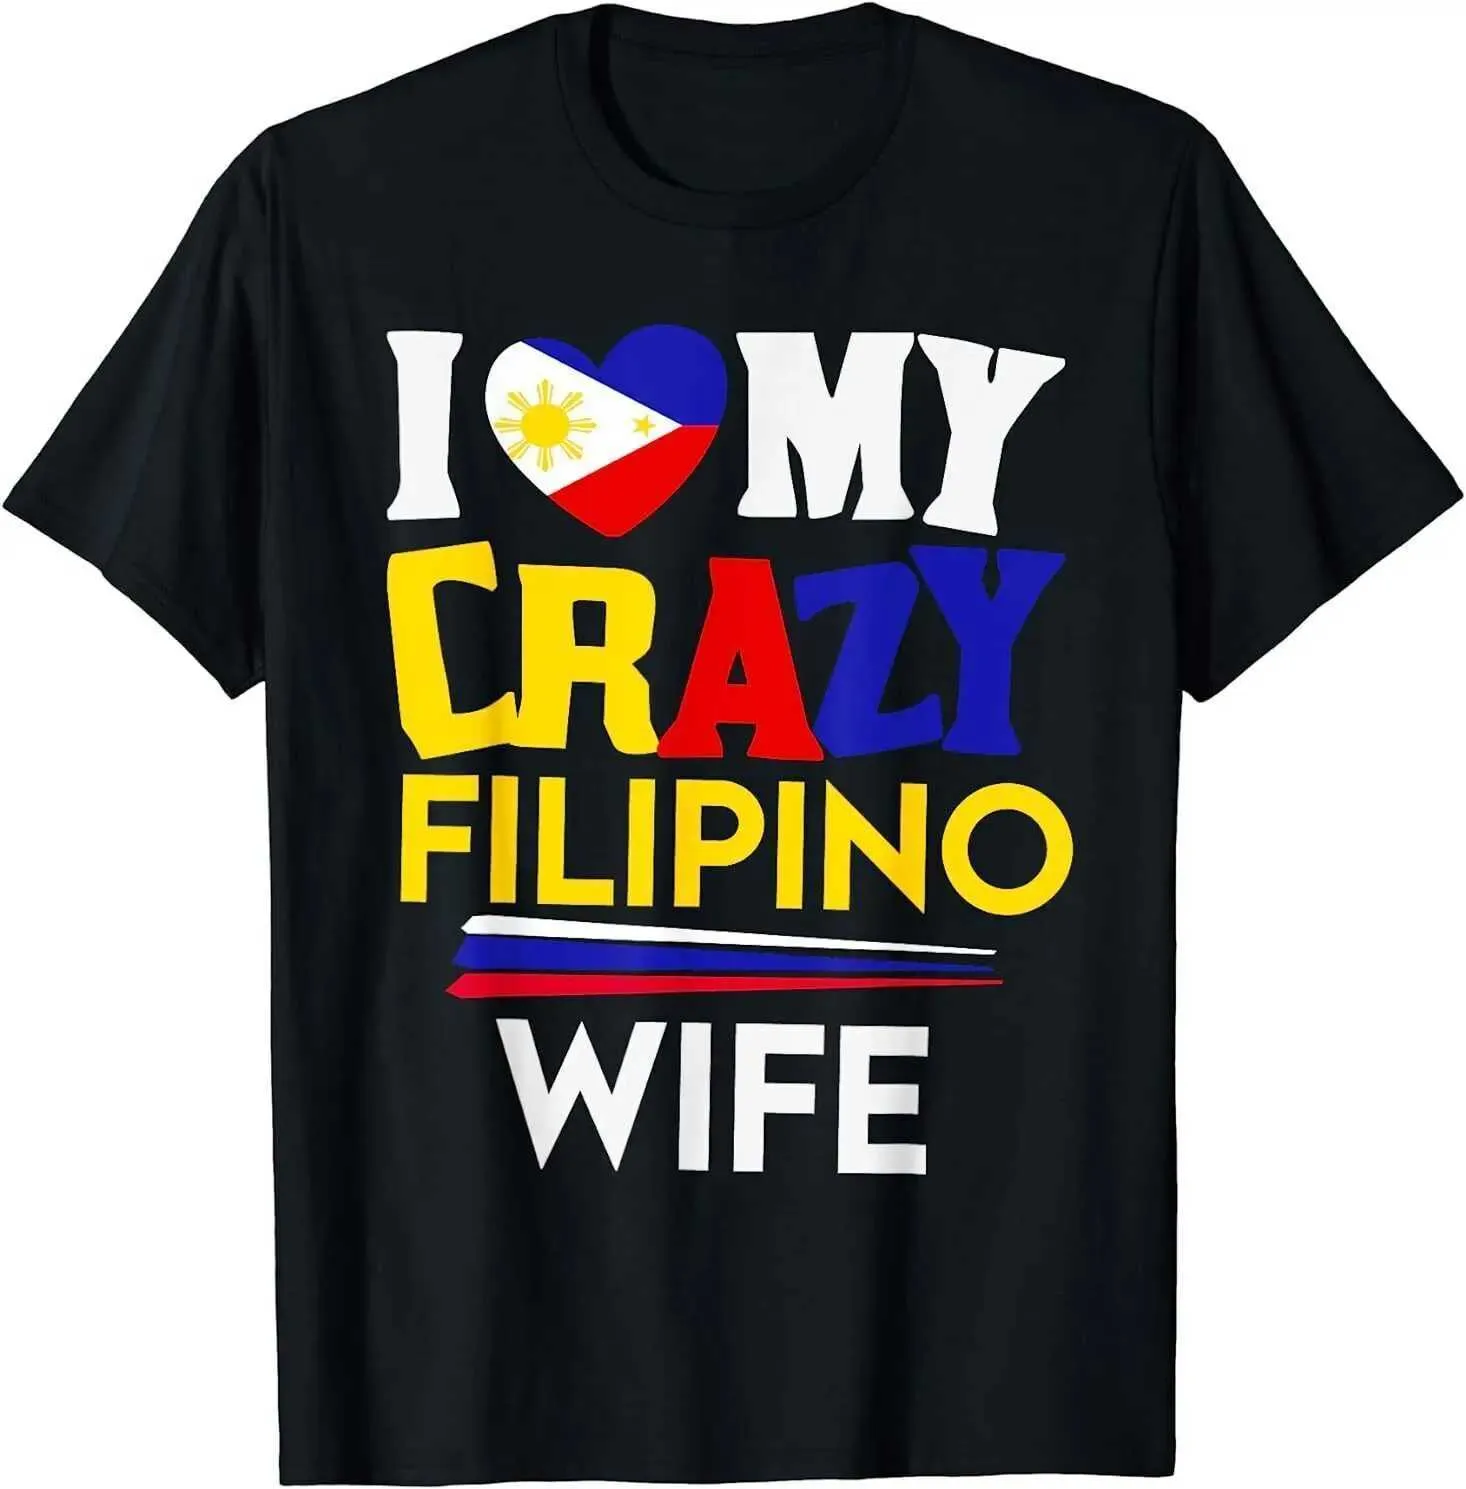 T-shirts masculins Nouveaux I Love My Crazy Filipino Wife Fime